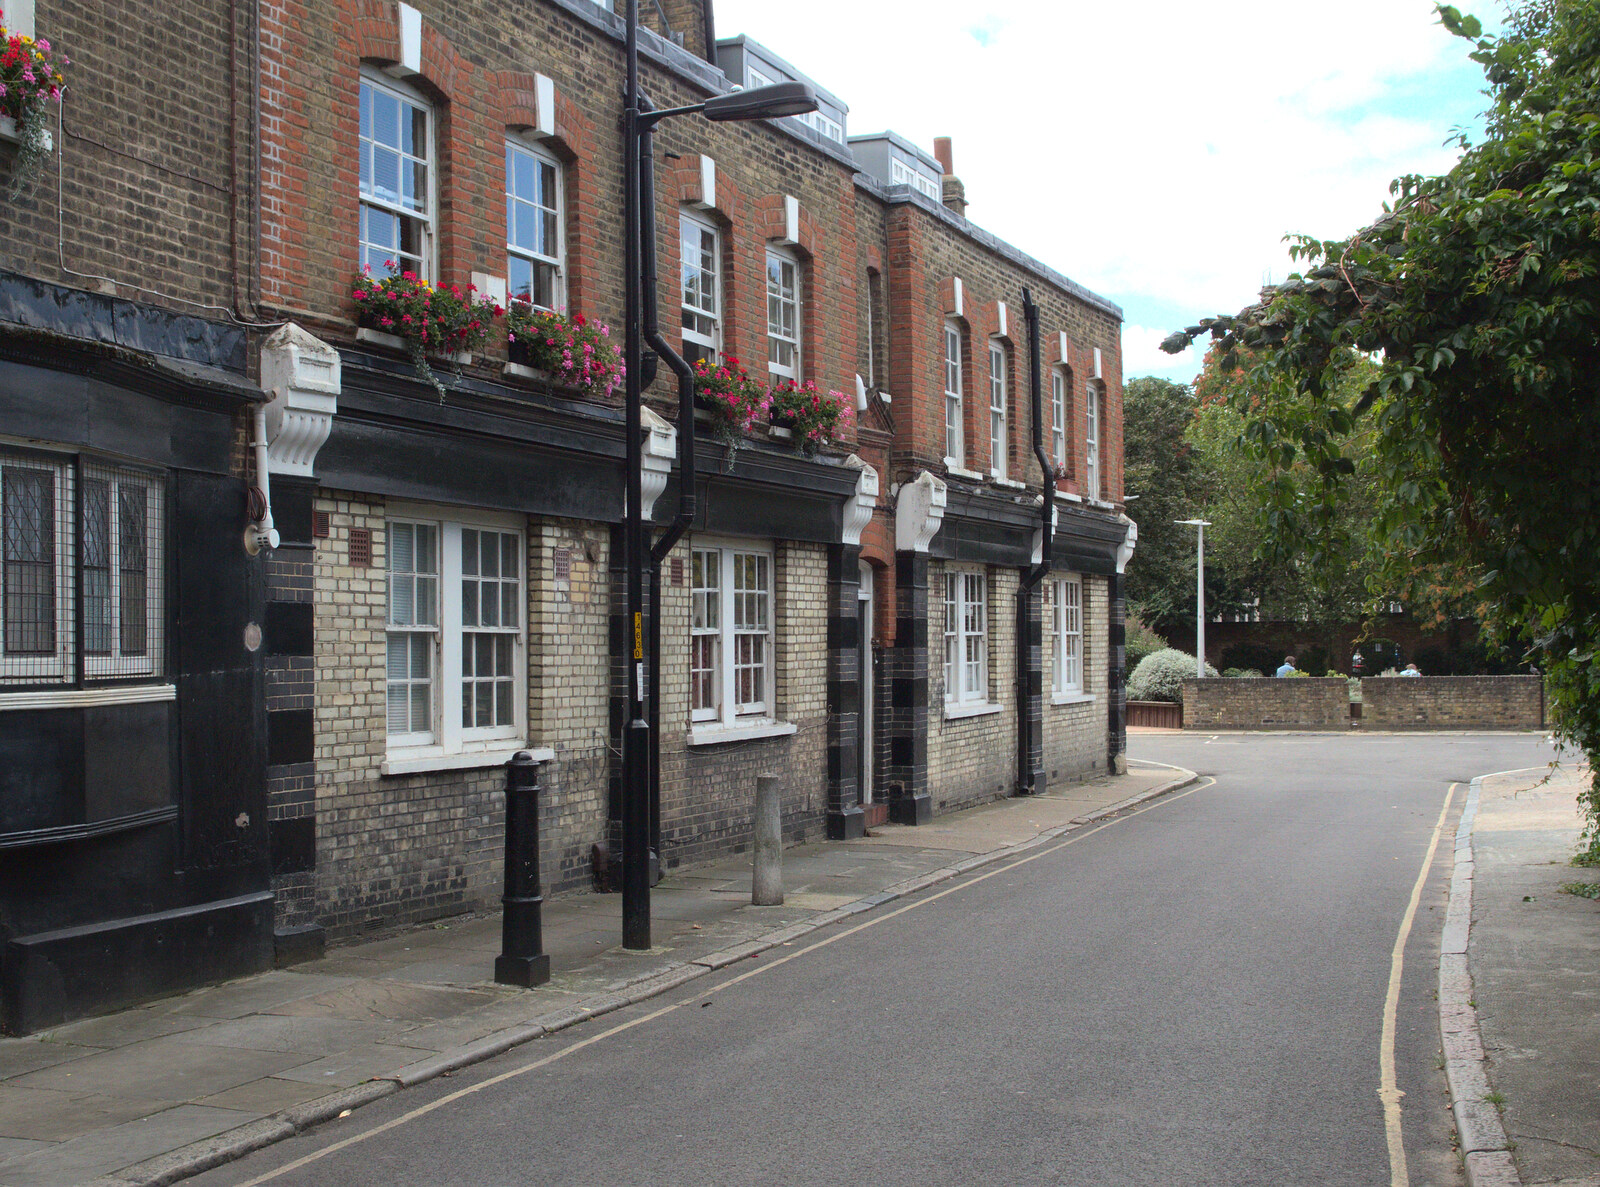 Nice houses on Weller Street from SwiftKey Innovation Day, and Pizza Pub, Westminster and Southwark - 14th August 2014